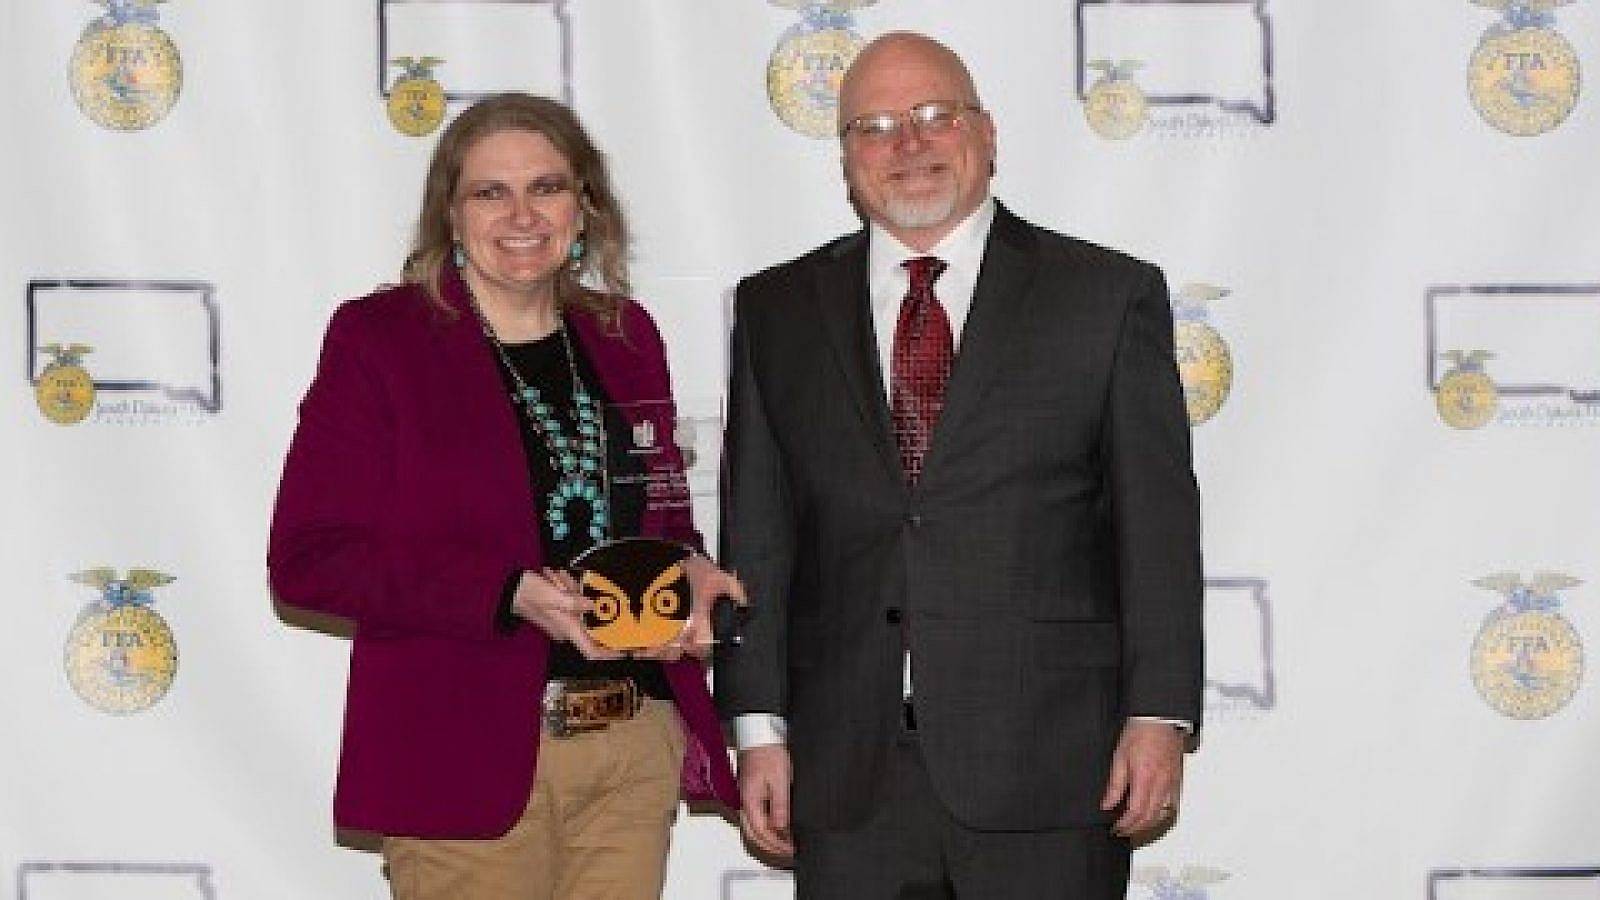 Teacher of the Year in Agriculture